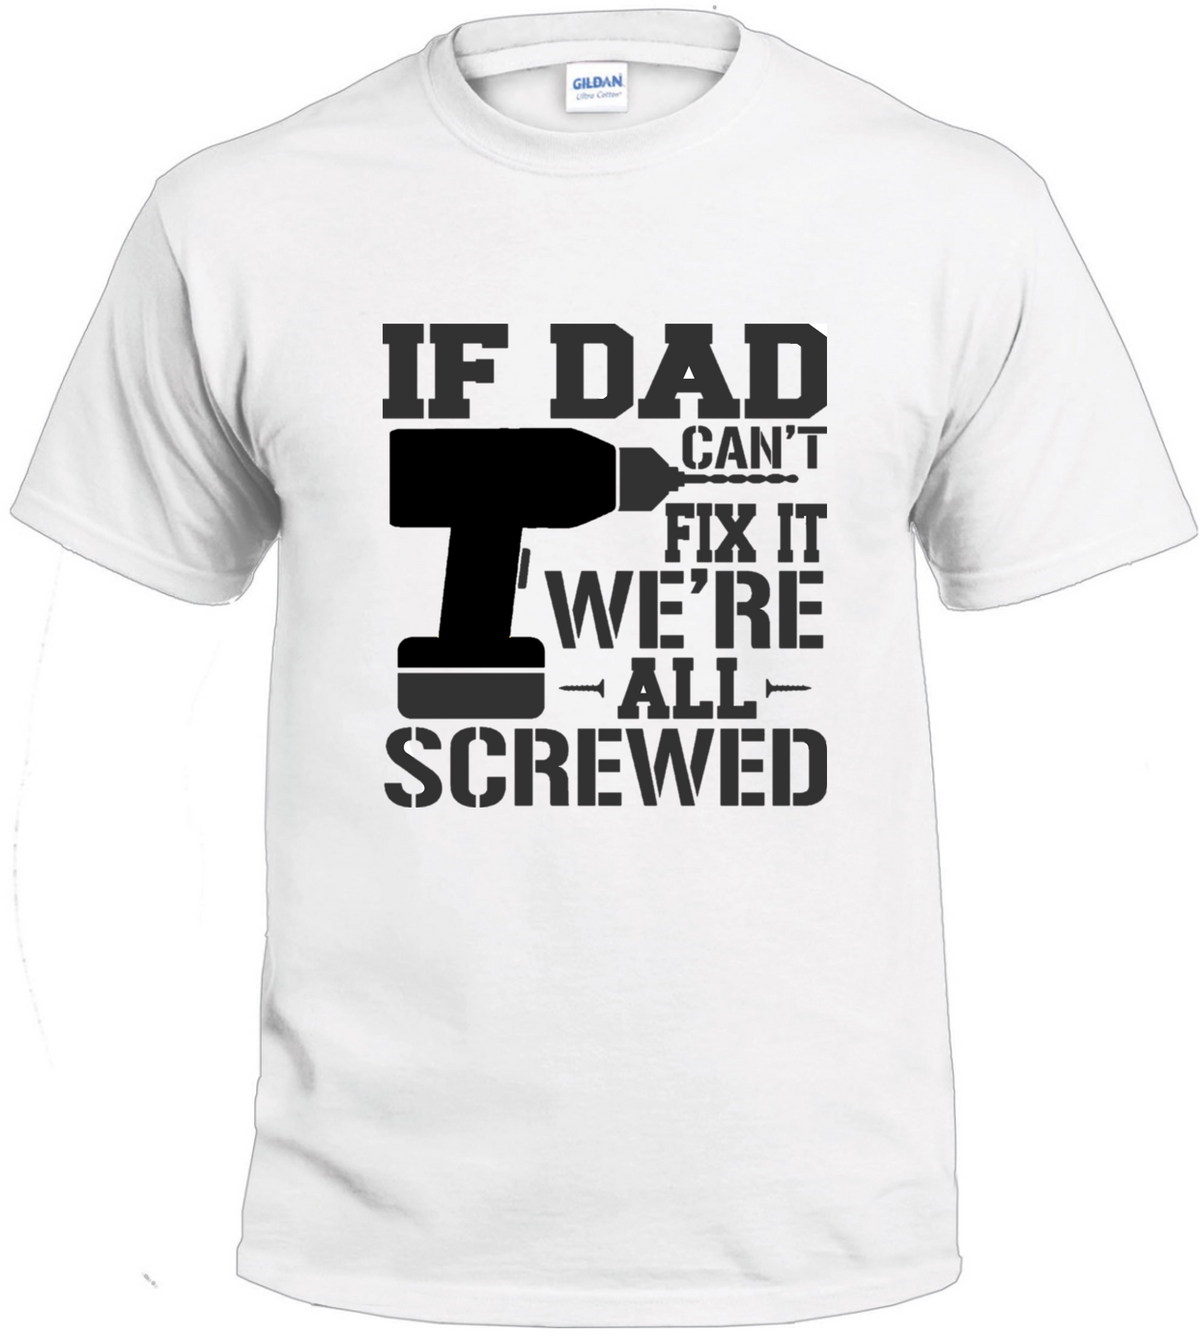 If Dad Can't Fix It t-shirt